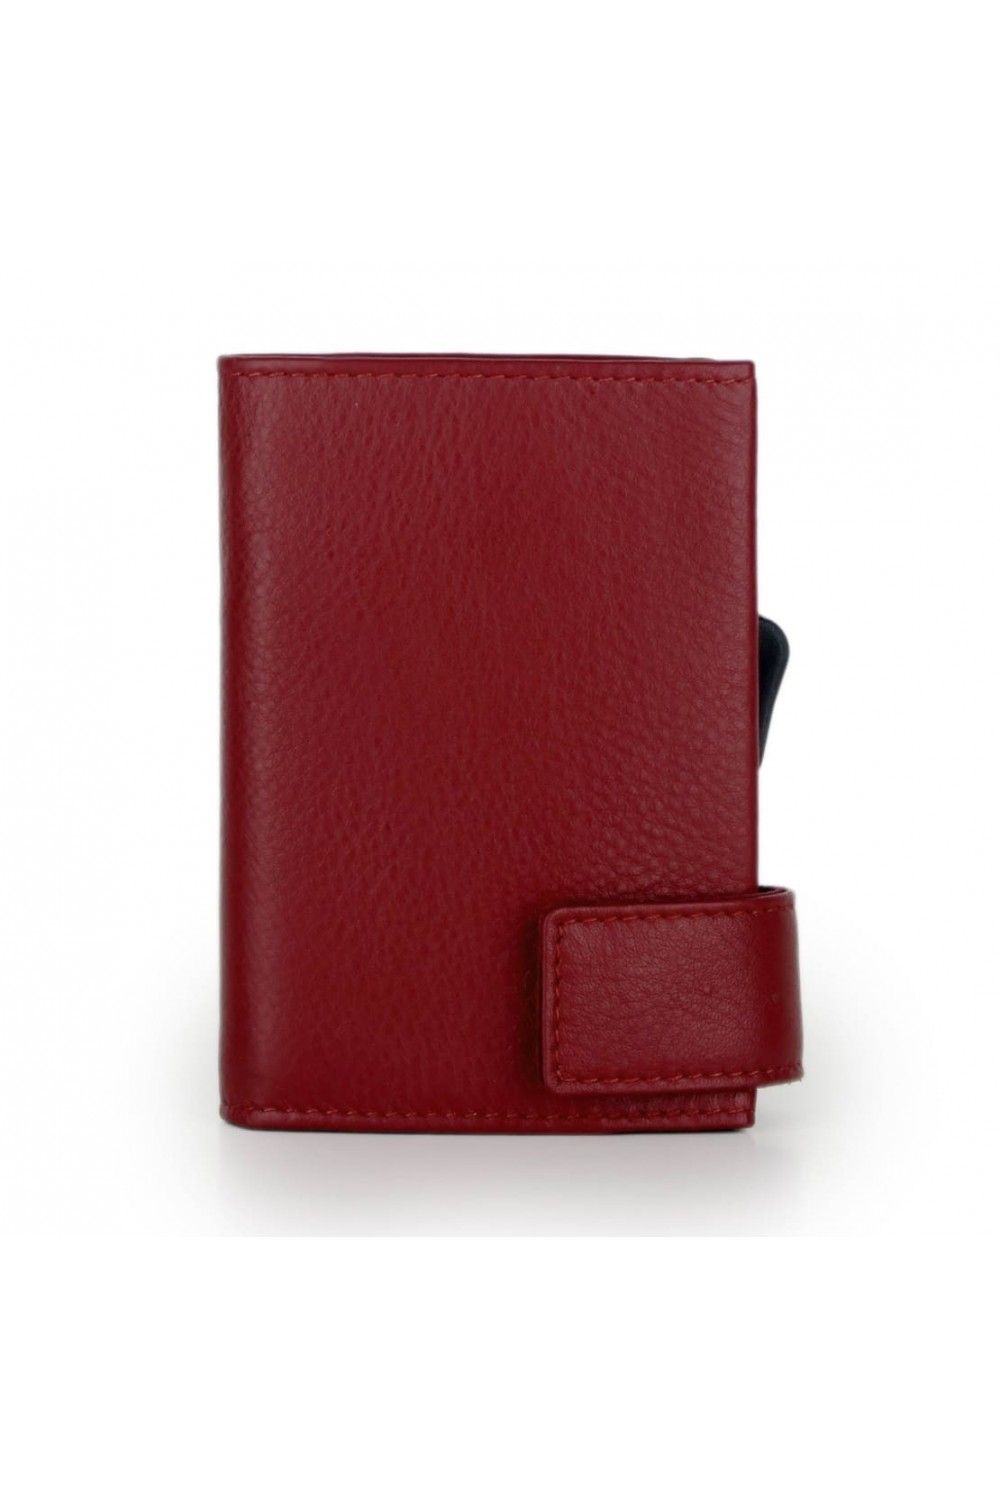 SecWal Card Case DK Leather Red